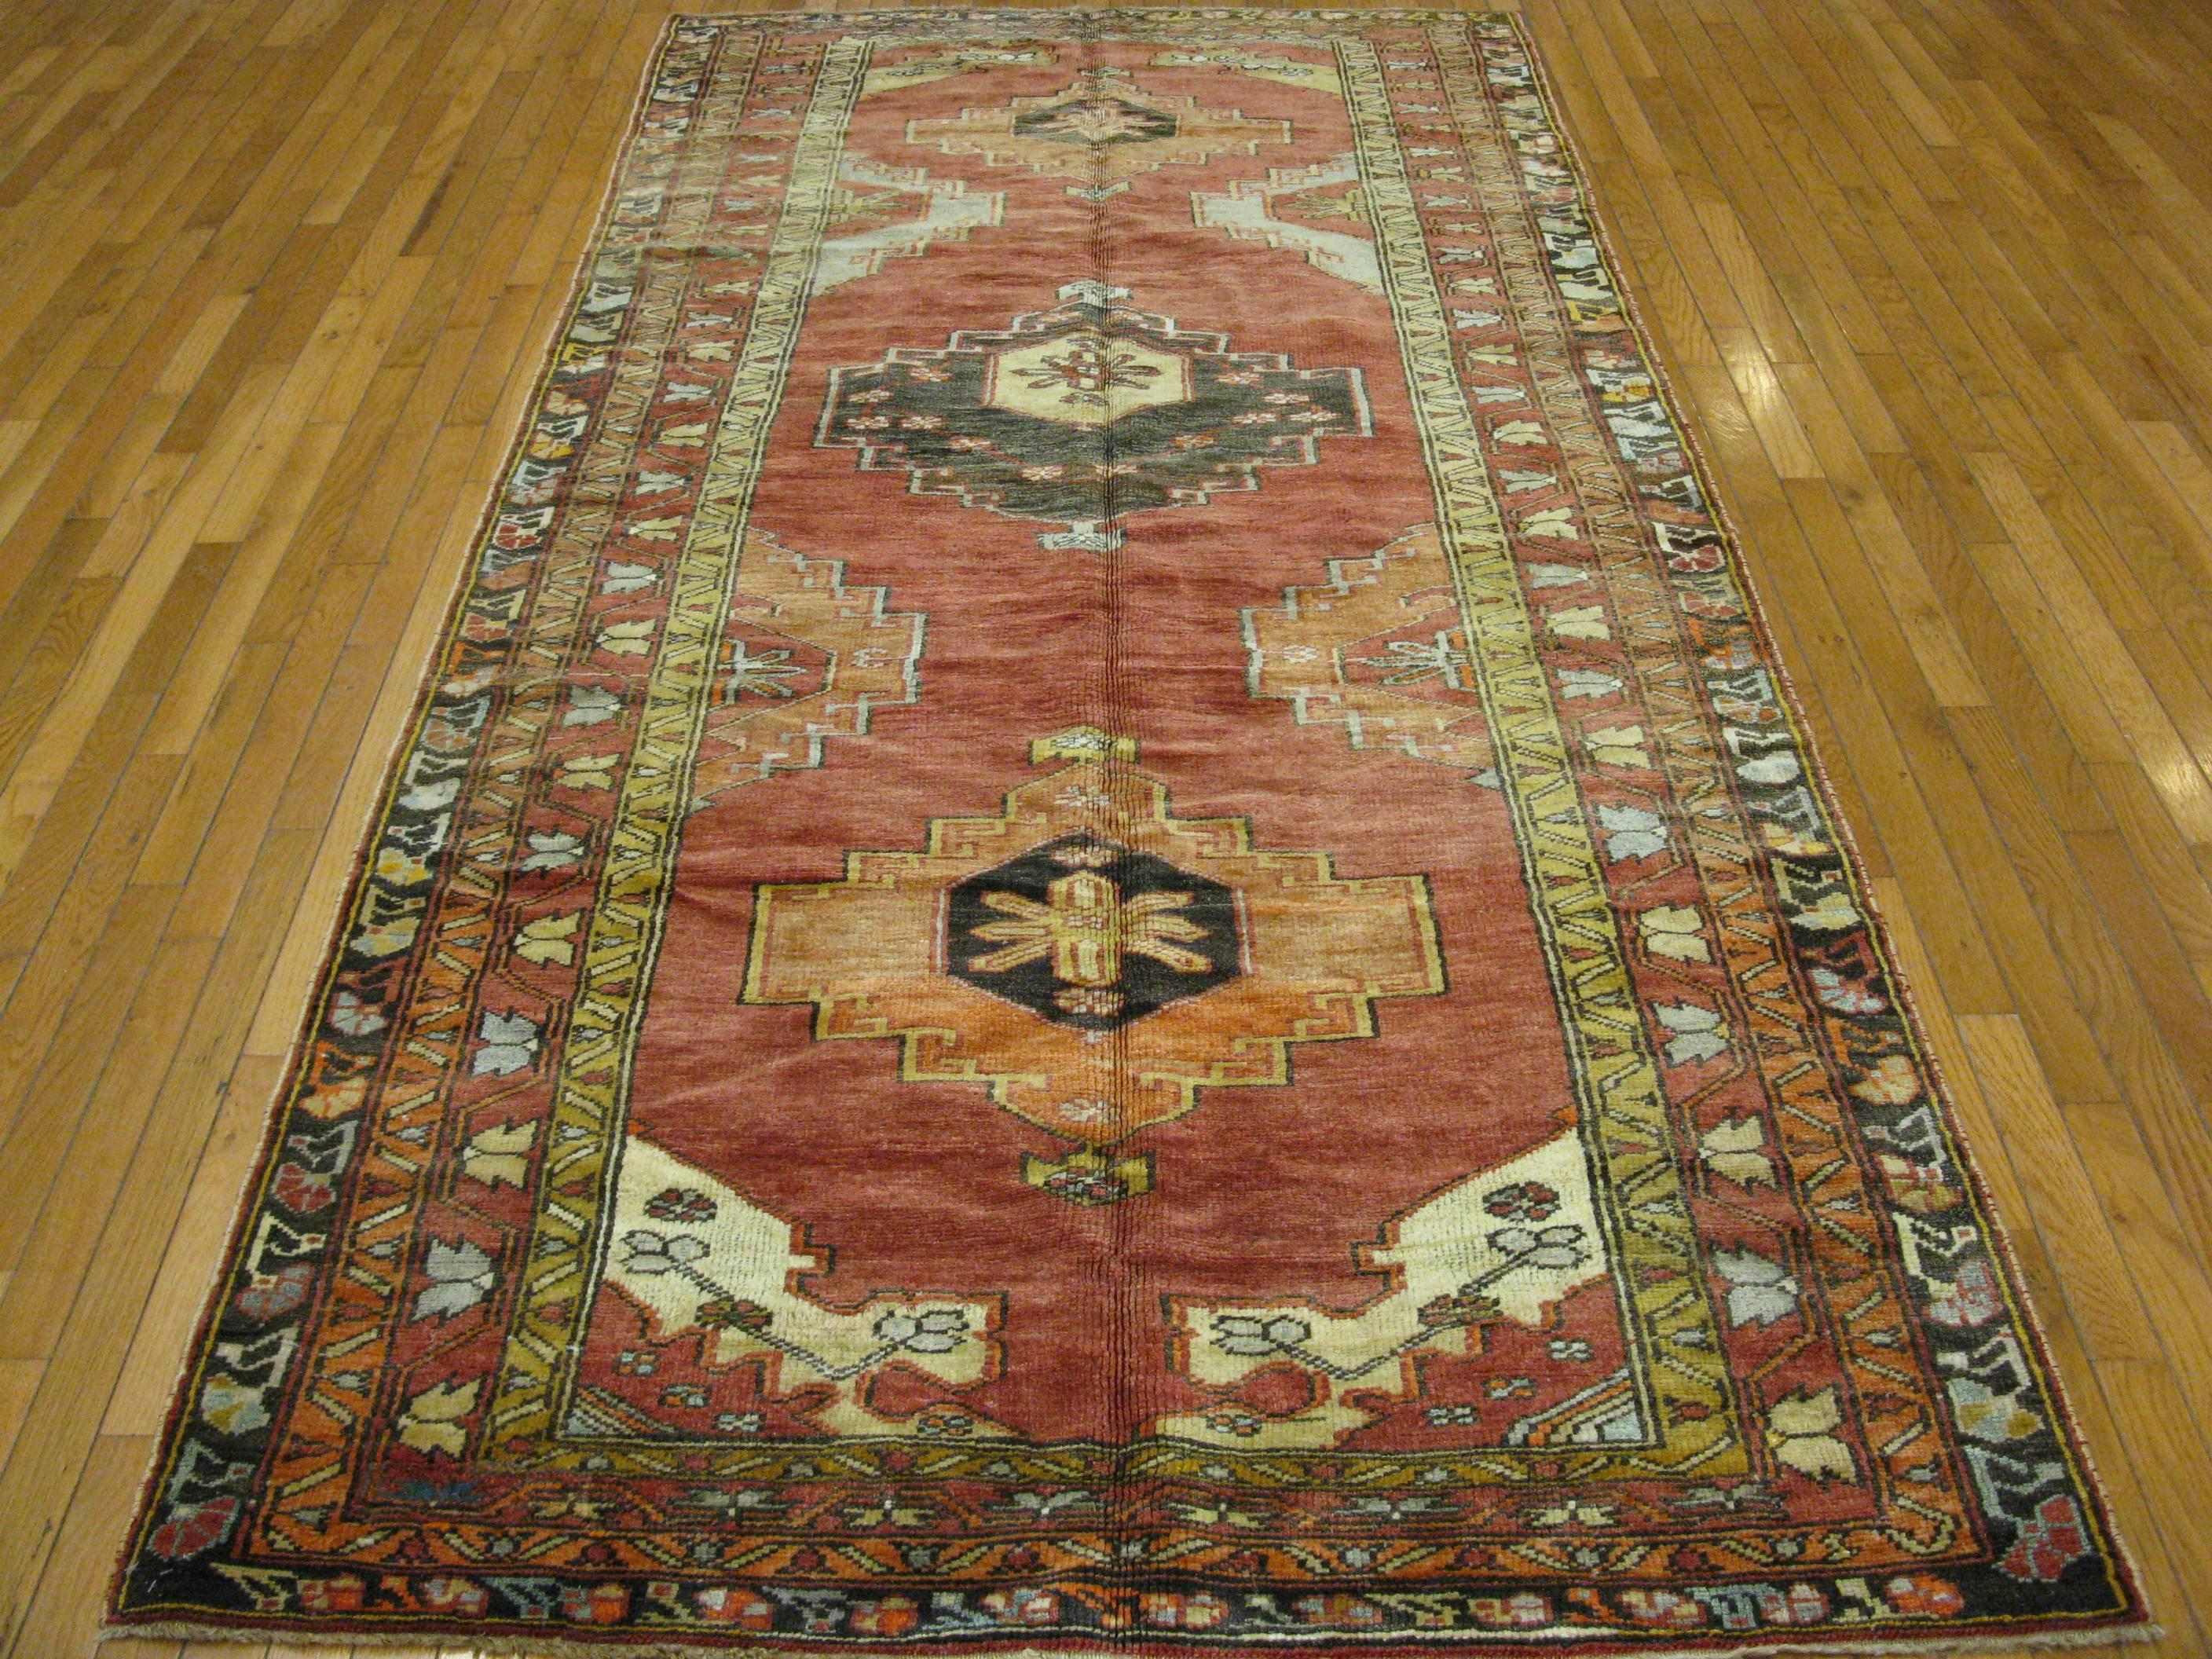 This is a vintage hand-knotted wide and long gallery runner from Turkey. It has a geometric tribal design made with wool pile and wool foundation. The rug measures 4' 7'' x 9' 9'' and it is in great condition.